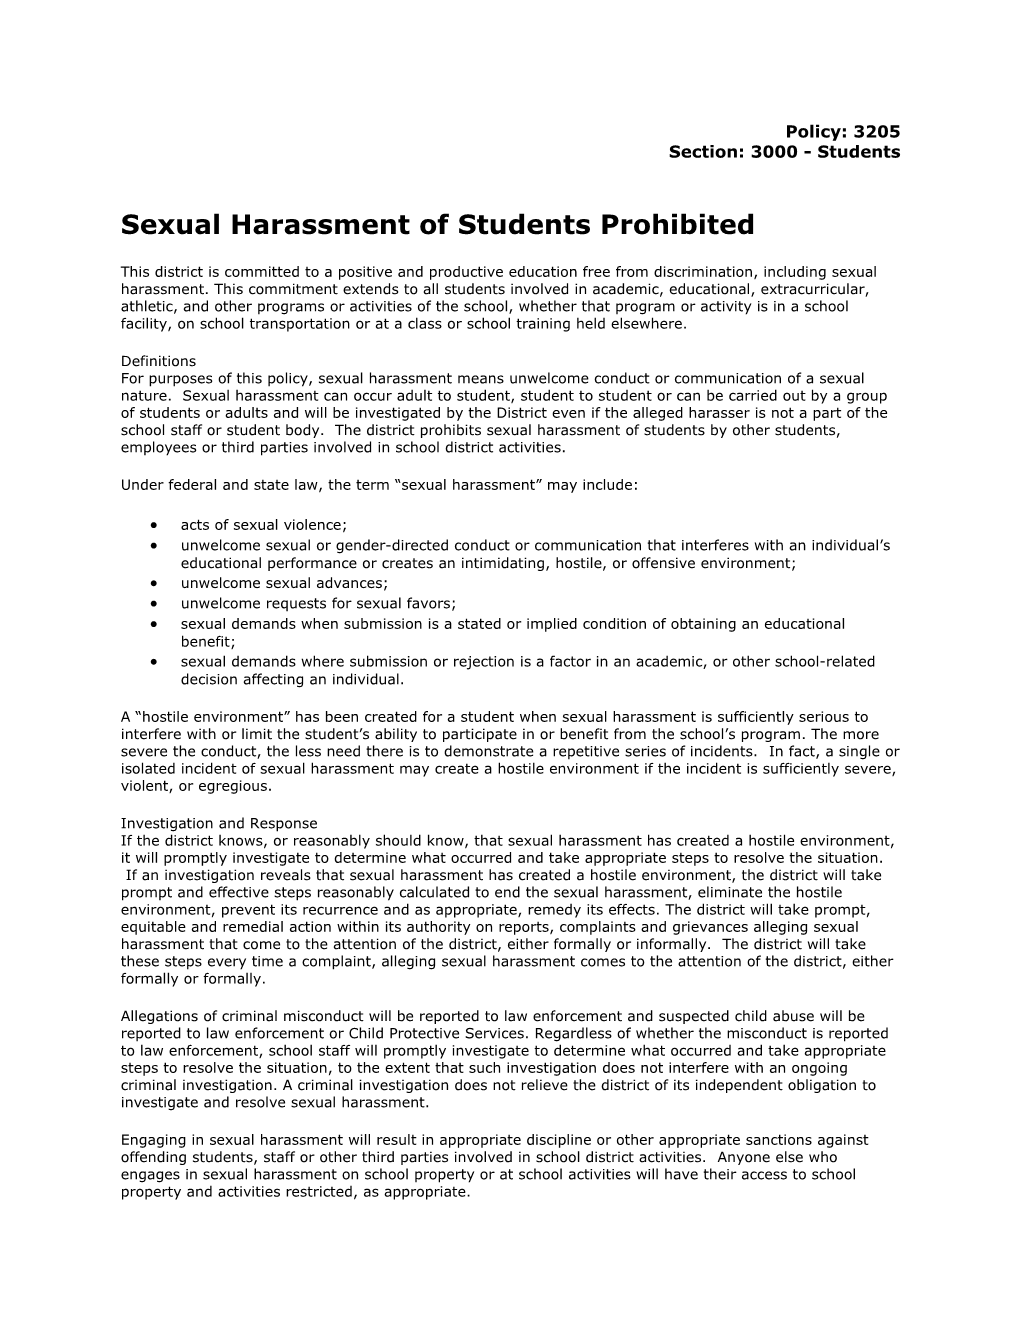 Sexual Harassment of Students Prohibited